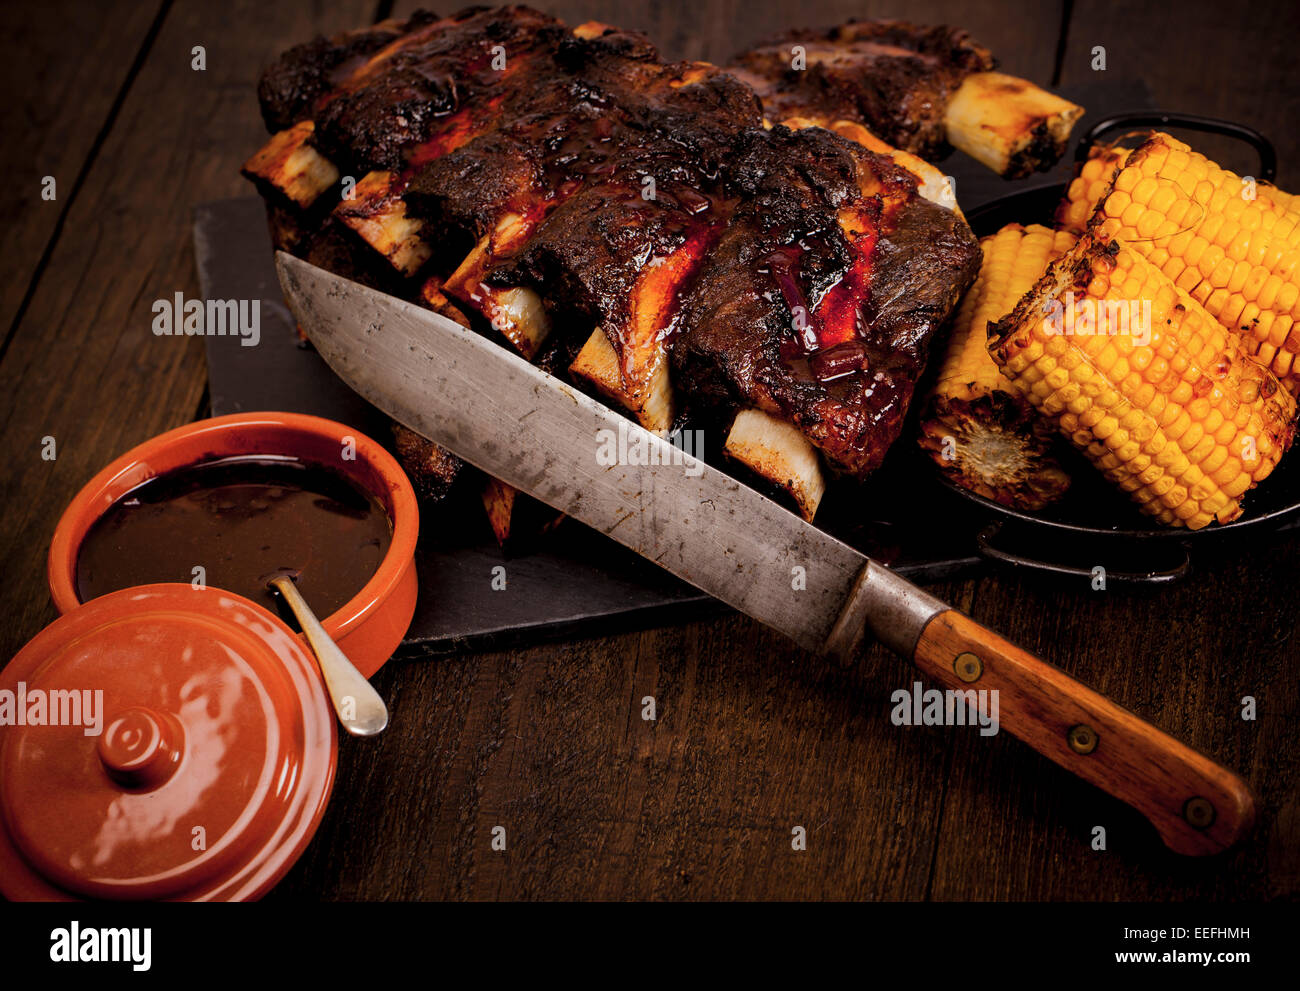 Beef ribs cooked on the BBQ and served with sweetcorn and a red wine souse. Stock Photo